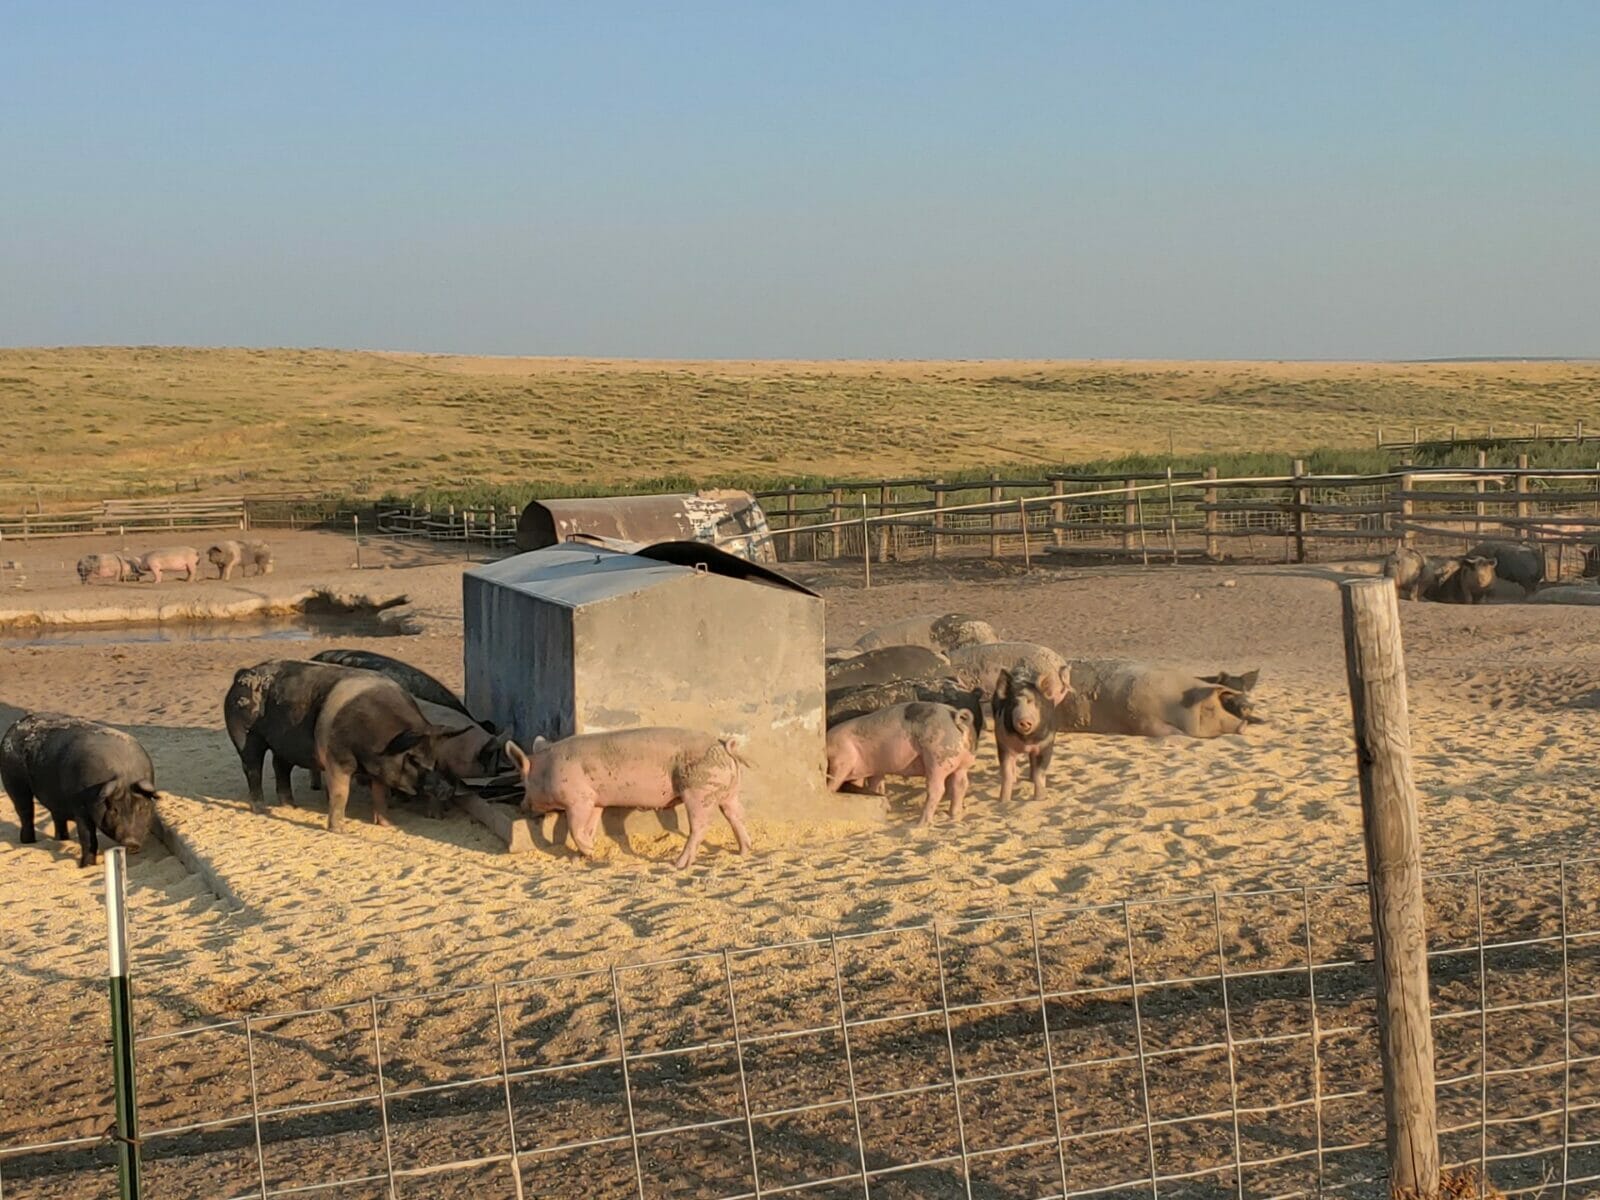 A group of pigs cluster around a feed trough in an large outdoor enclosure.